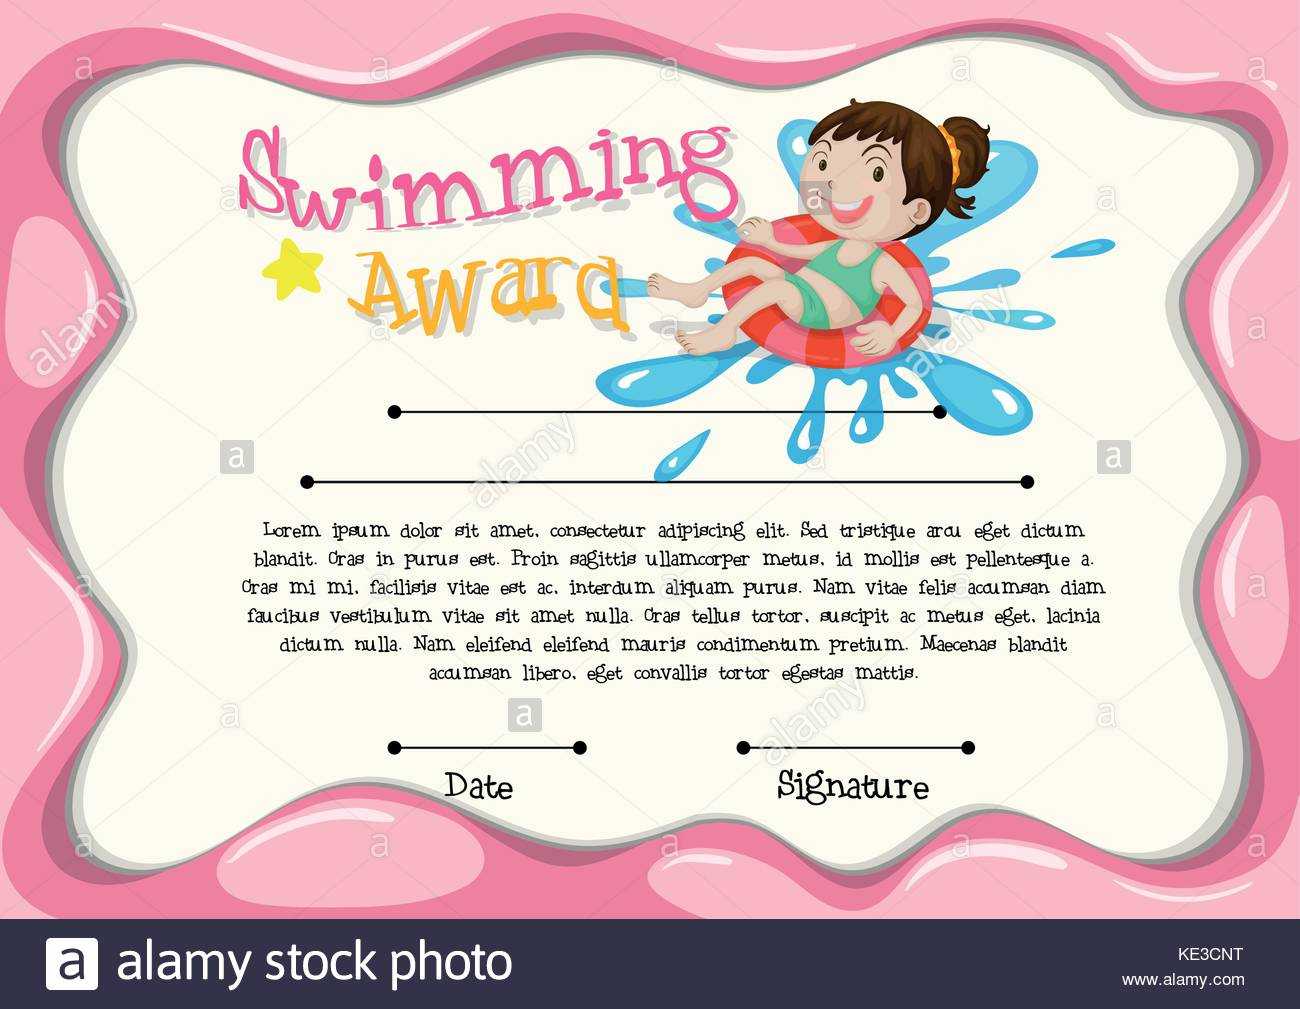 Certificate Template With Girl Swimming Illustration Stock Inside Swimming Award Certificate Template